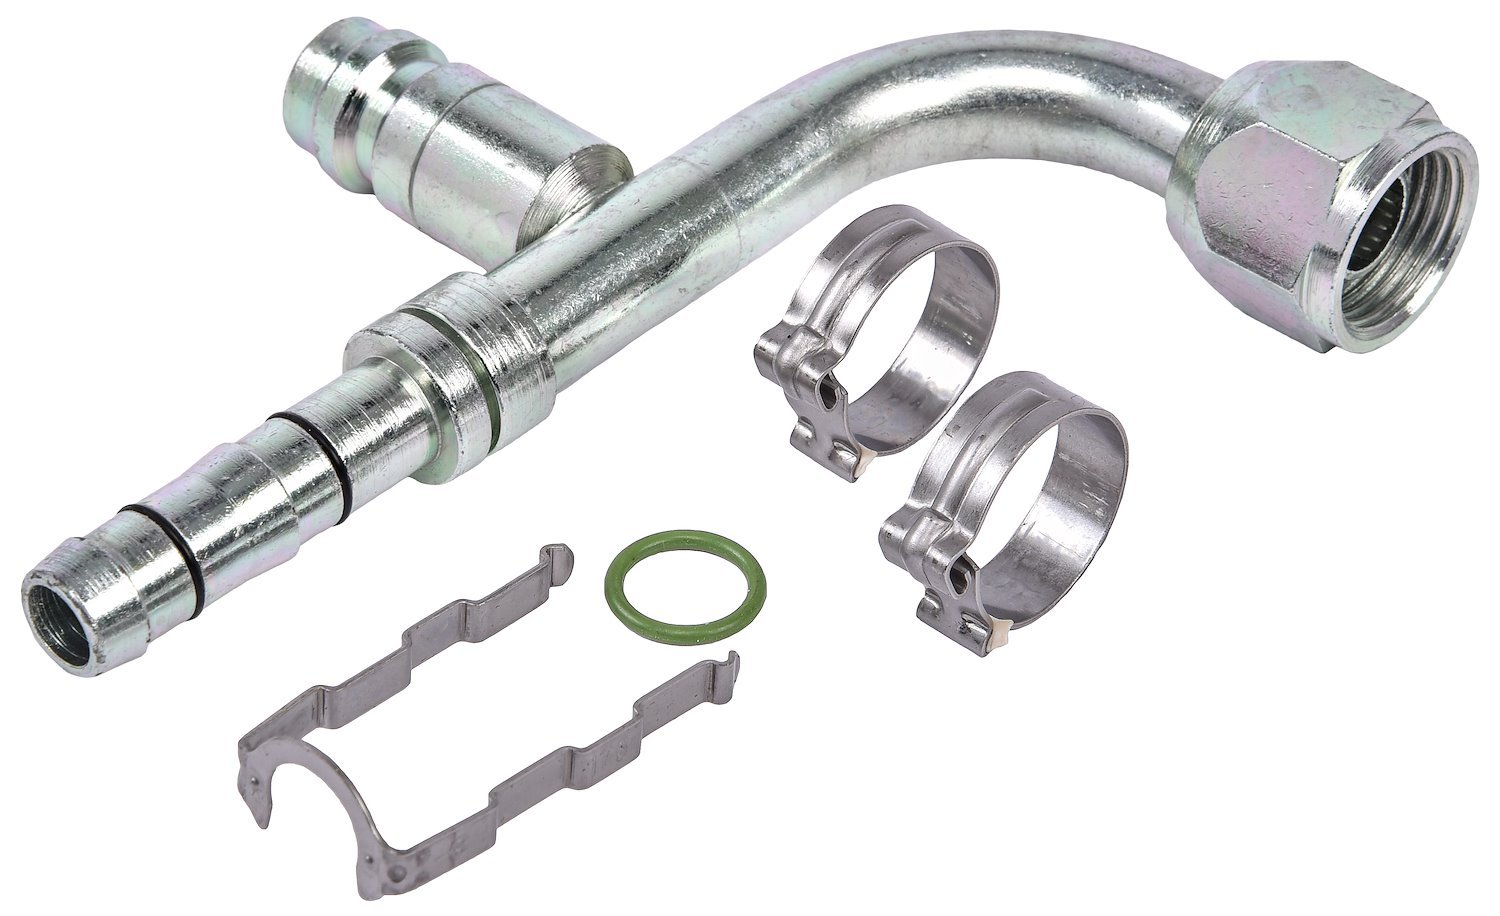 EZ Clip A/C Hose End Fitting Kit with R134a Port [-8 Hose Fitting, 90 degree]